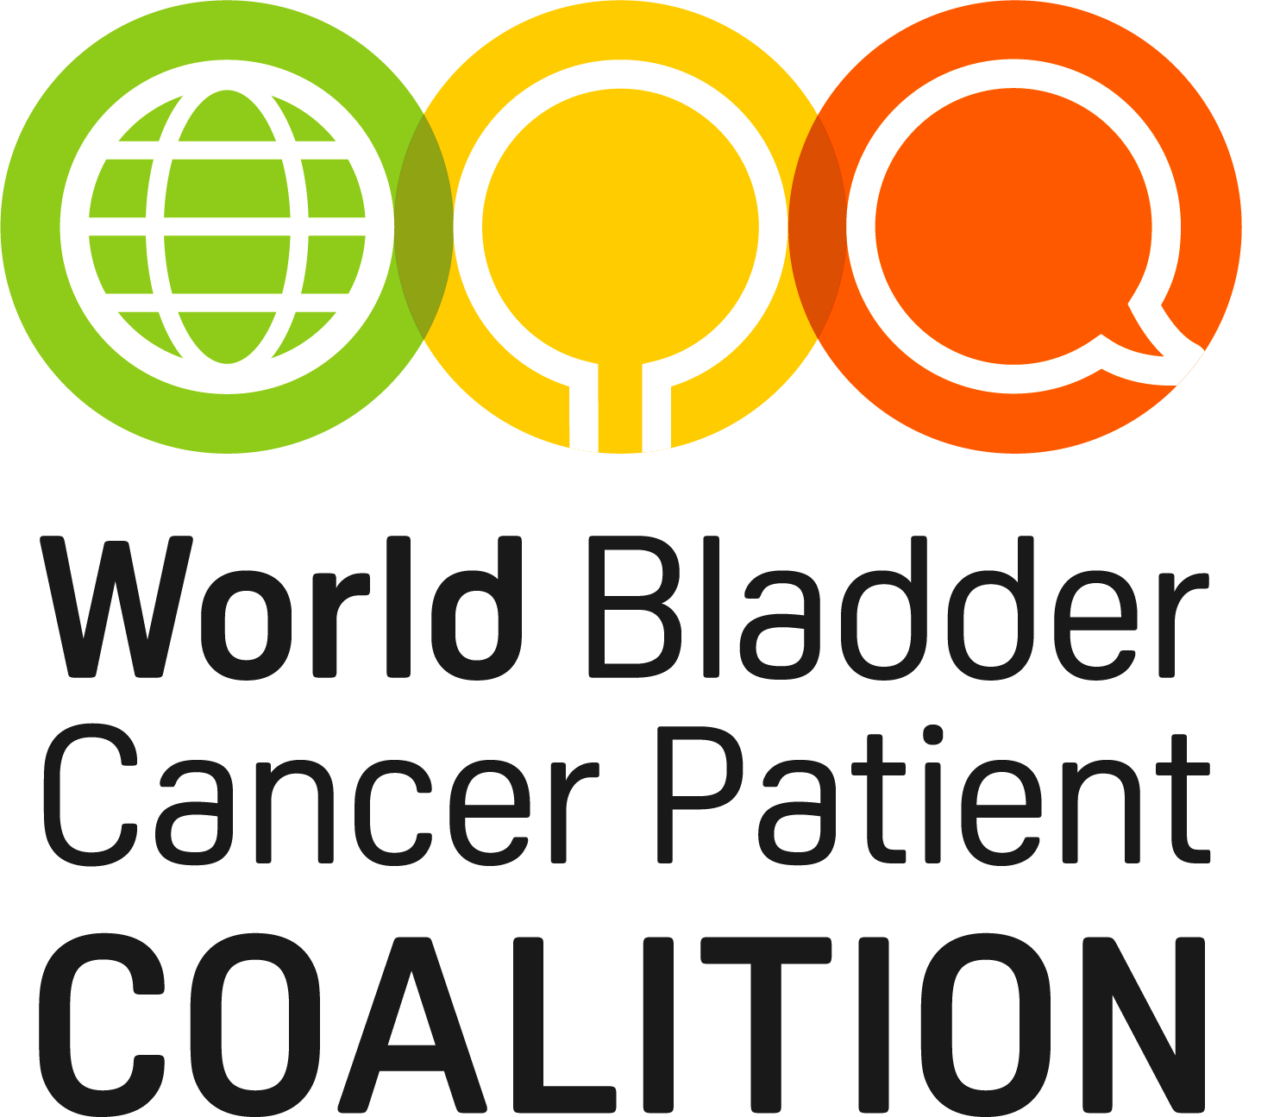 The 3rd World Bladder Cancer Patient Forum was a milestone event for our international community – World Bladder Cancer Patient Coalition